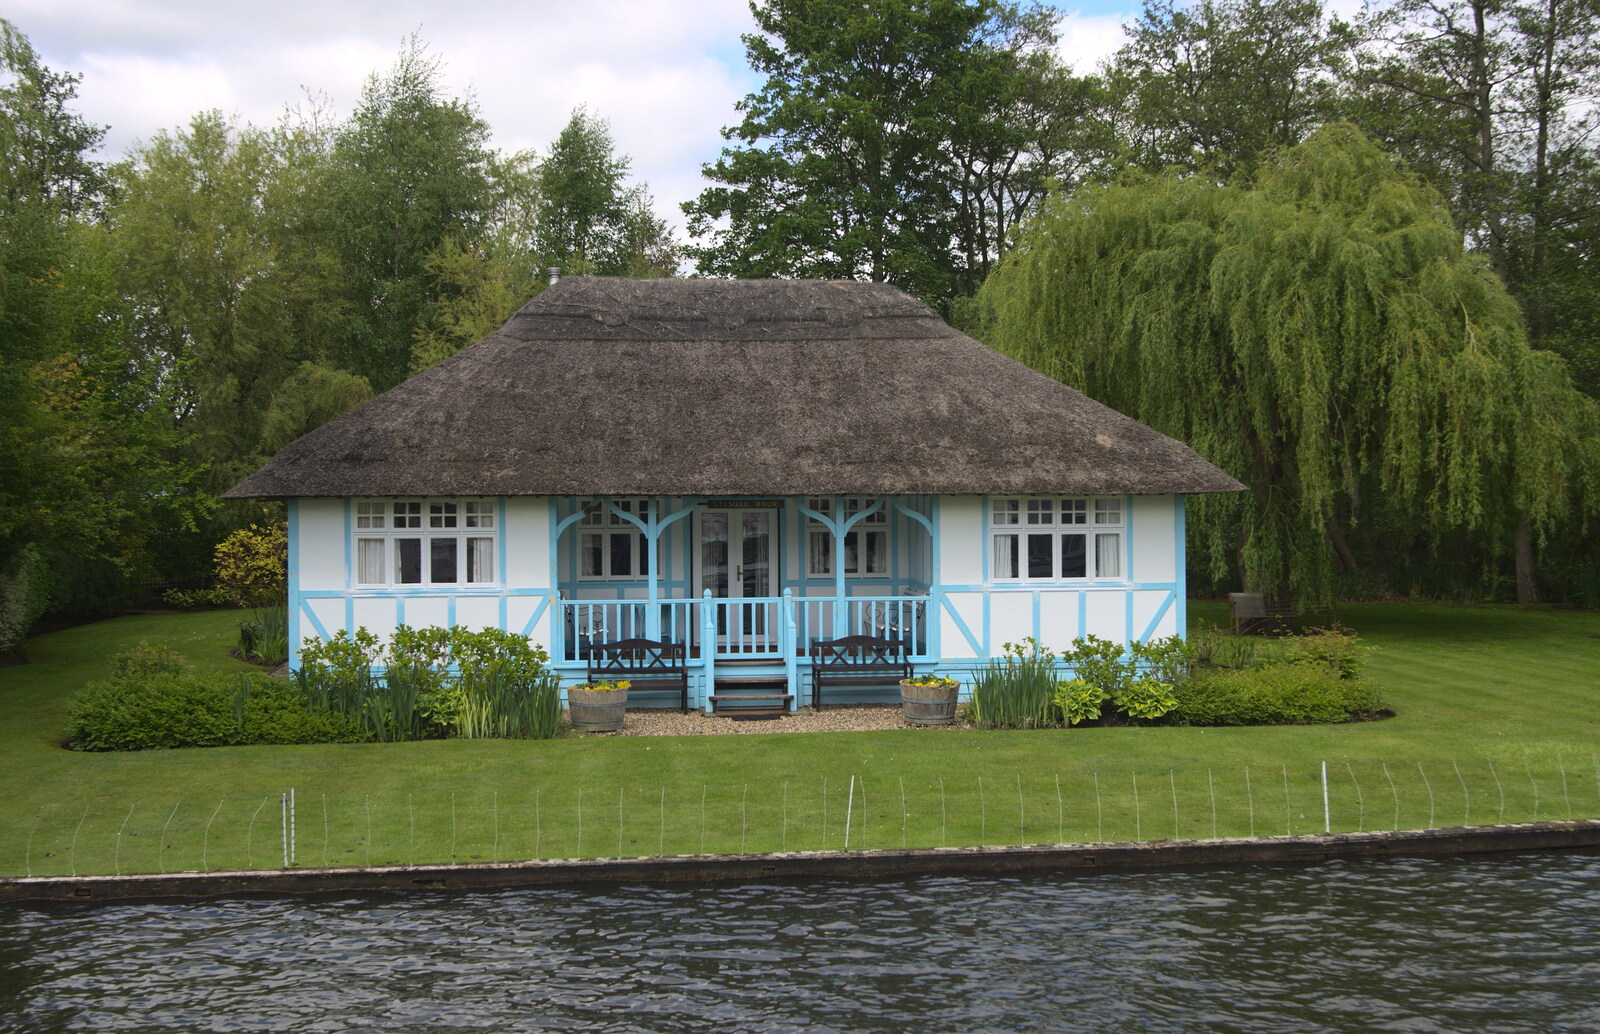 A cute thatched bungalow from A Trip on the Norfolk Broads, Wroxham, Norfolk - 25th May 2013